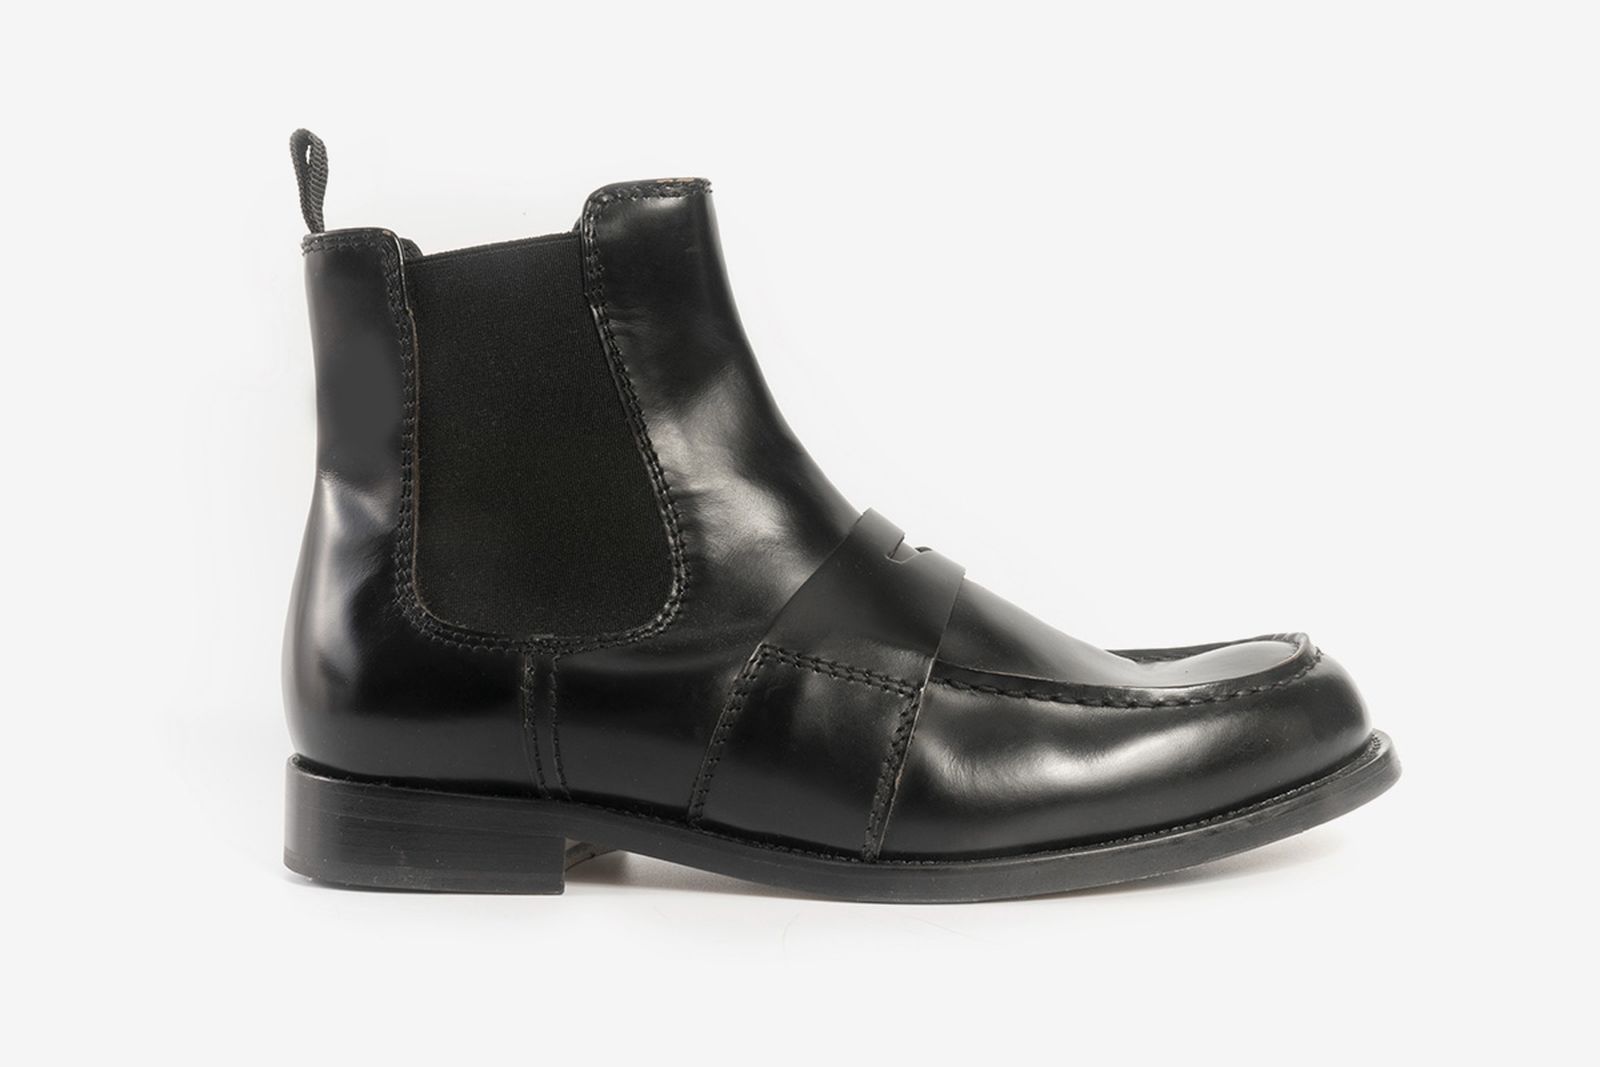 college-loafer-chelsea-boot-hybrid-release-date-price-03